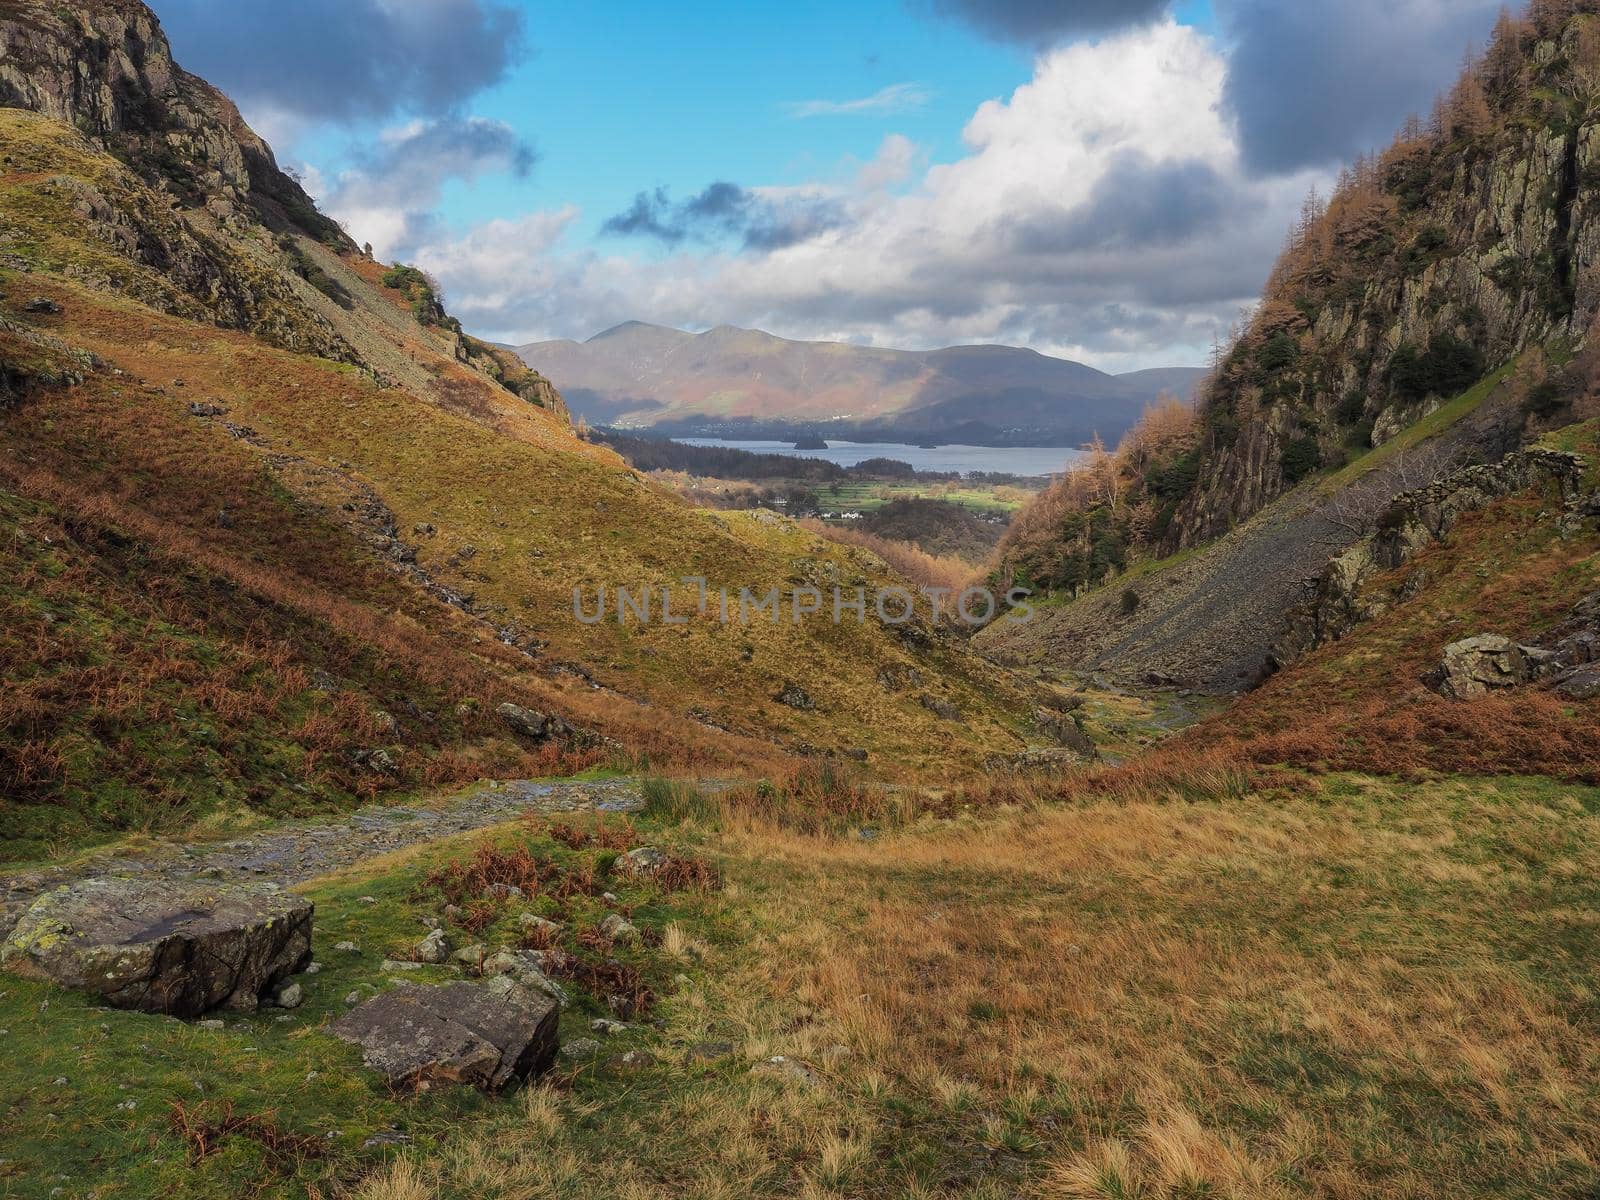 A glimpse of Derwent Water from a path winding through a steep valley with sunlight catching the fells in the distance, Lake District, UK